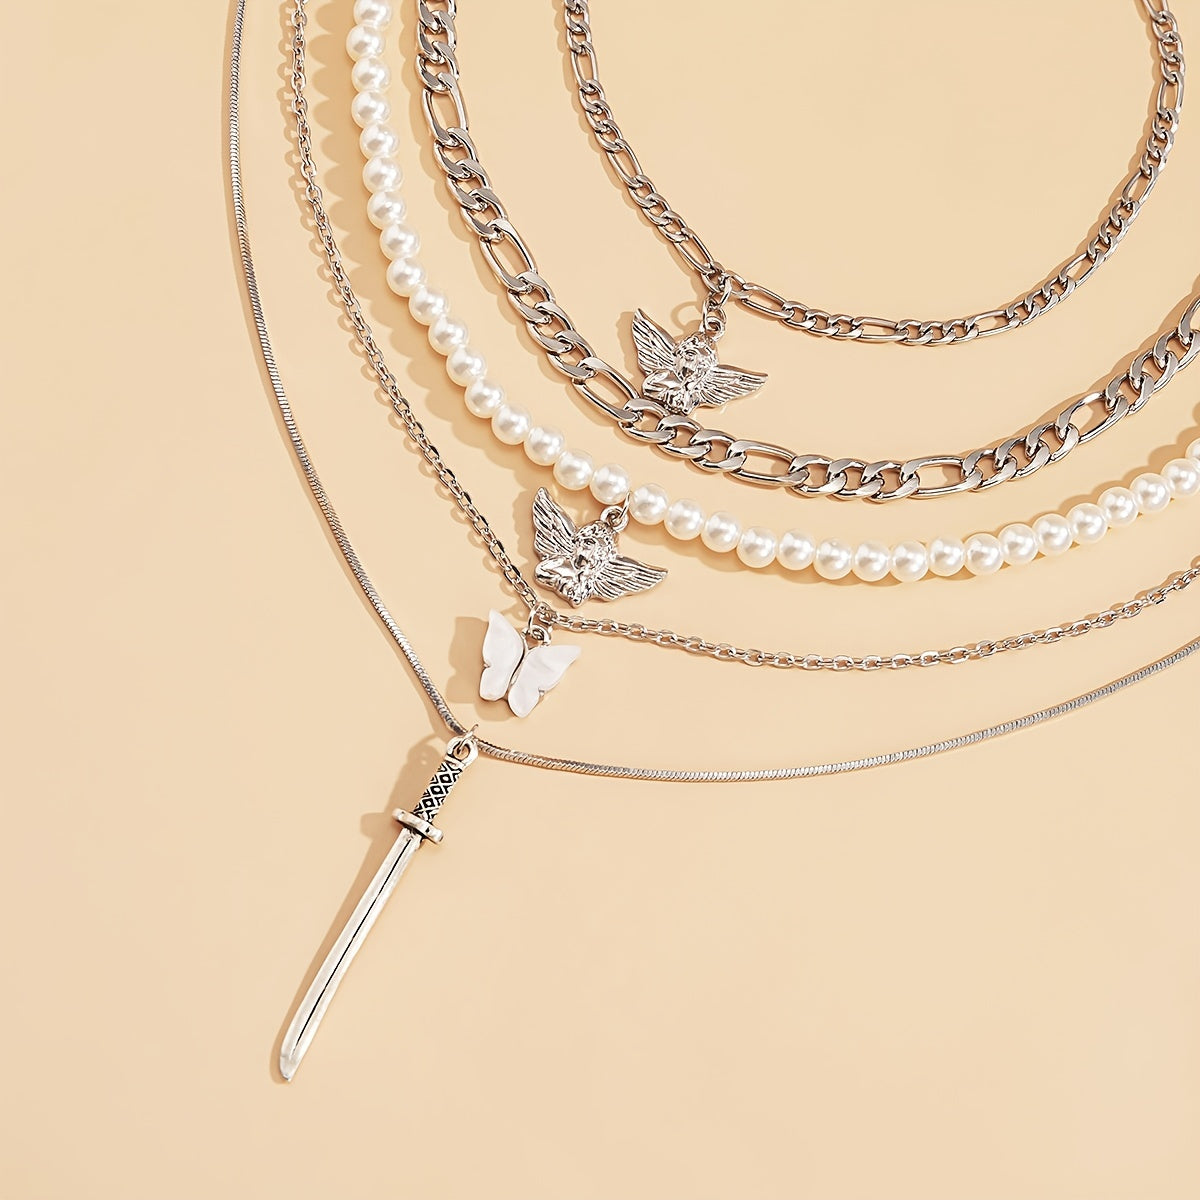 Gorgeous Pearl Angel Sword Charm Chain Necklace Set - Perfect Gift for Women on Birthdays & Special Occasions!